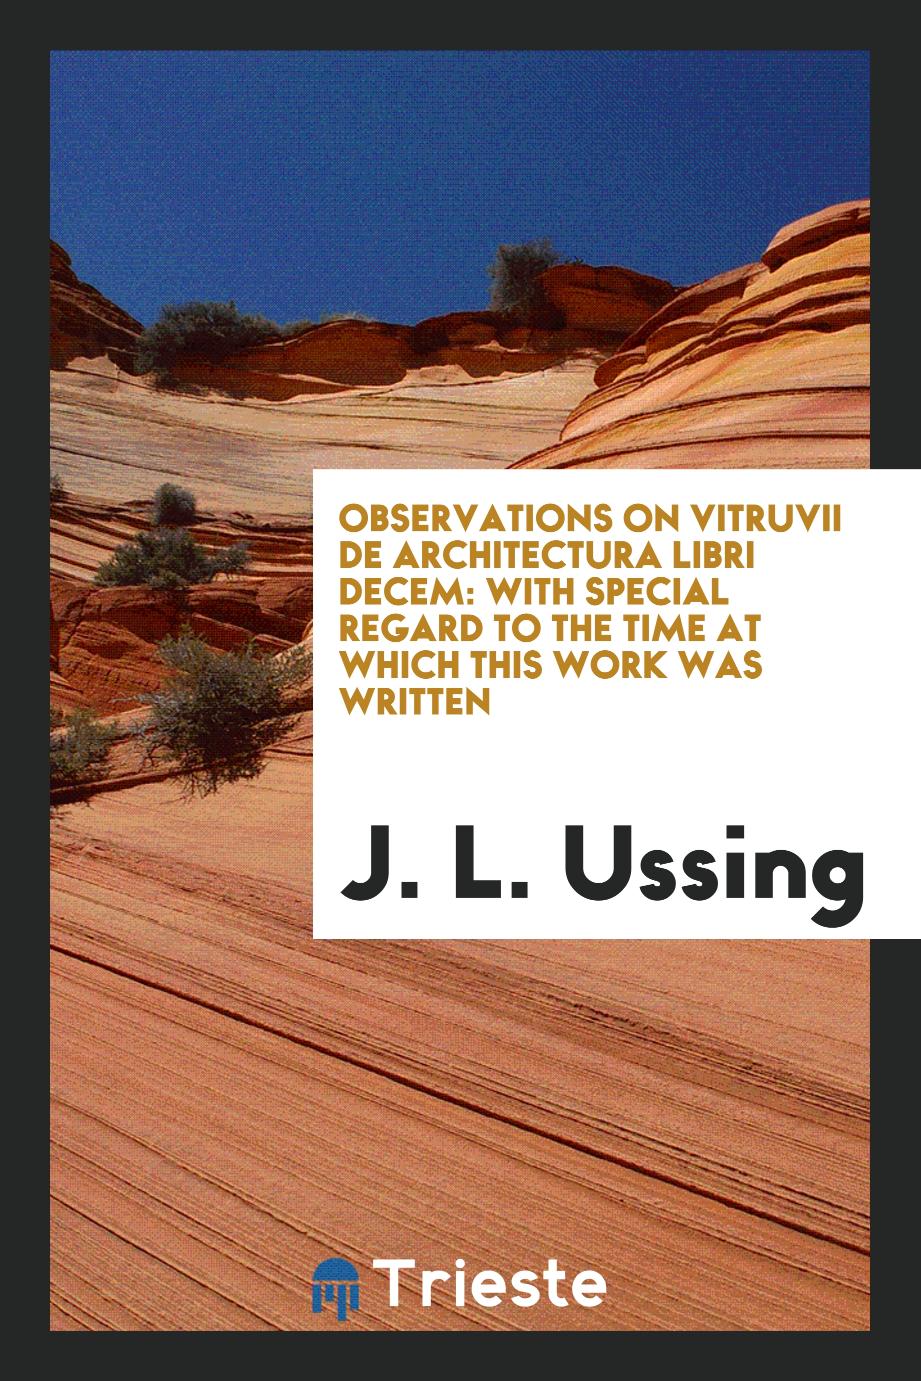 Observations on Vitruvii De Architectura Libri Decem: With Special Regard to the Time at which this work was written